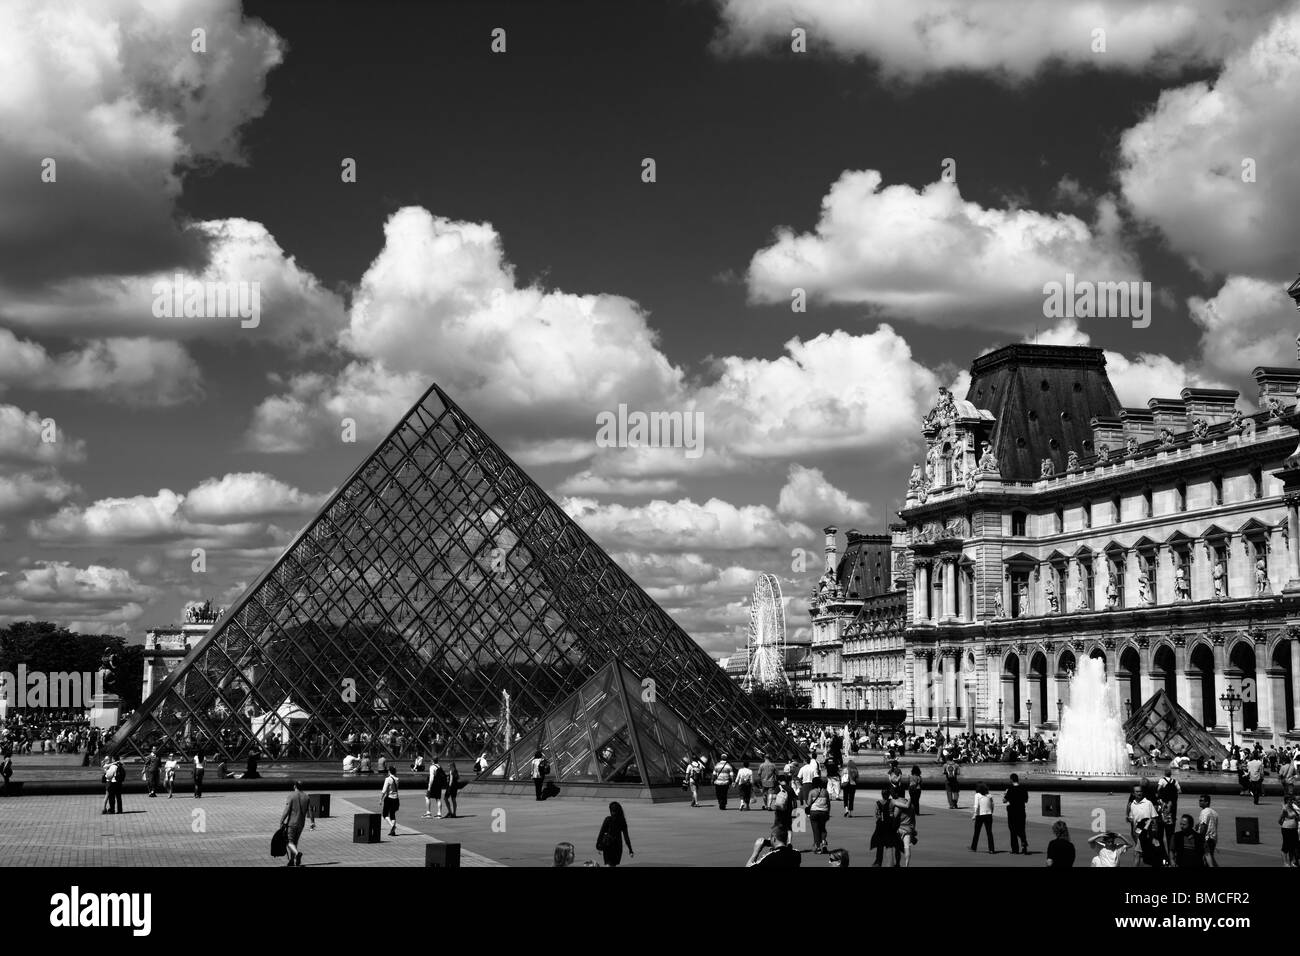 Dramatic Black and white Panoramic view of the Glass Pyramid and fountains of the Louvre beautiful dramatic sky  Paris France Stock Photo